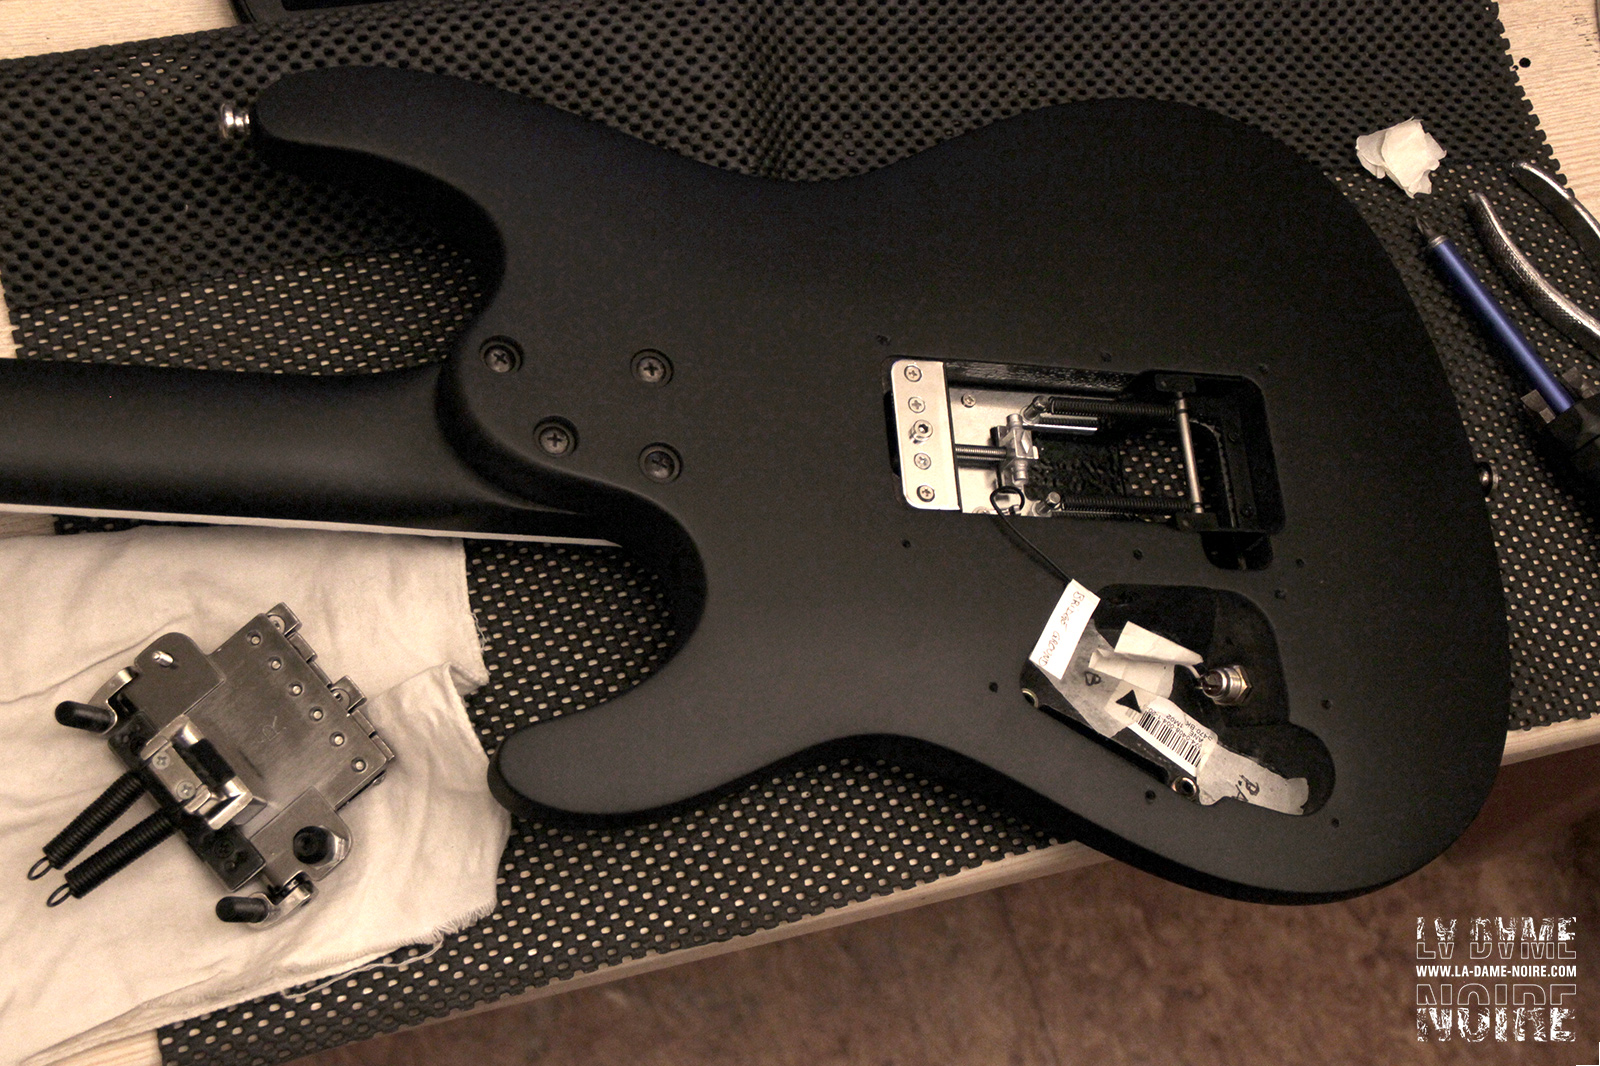 Picture of the guitar painted in black and free from its bridge